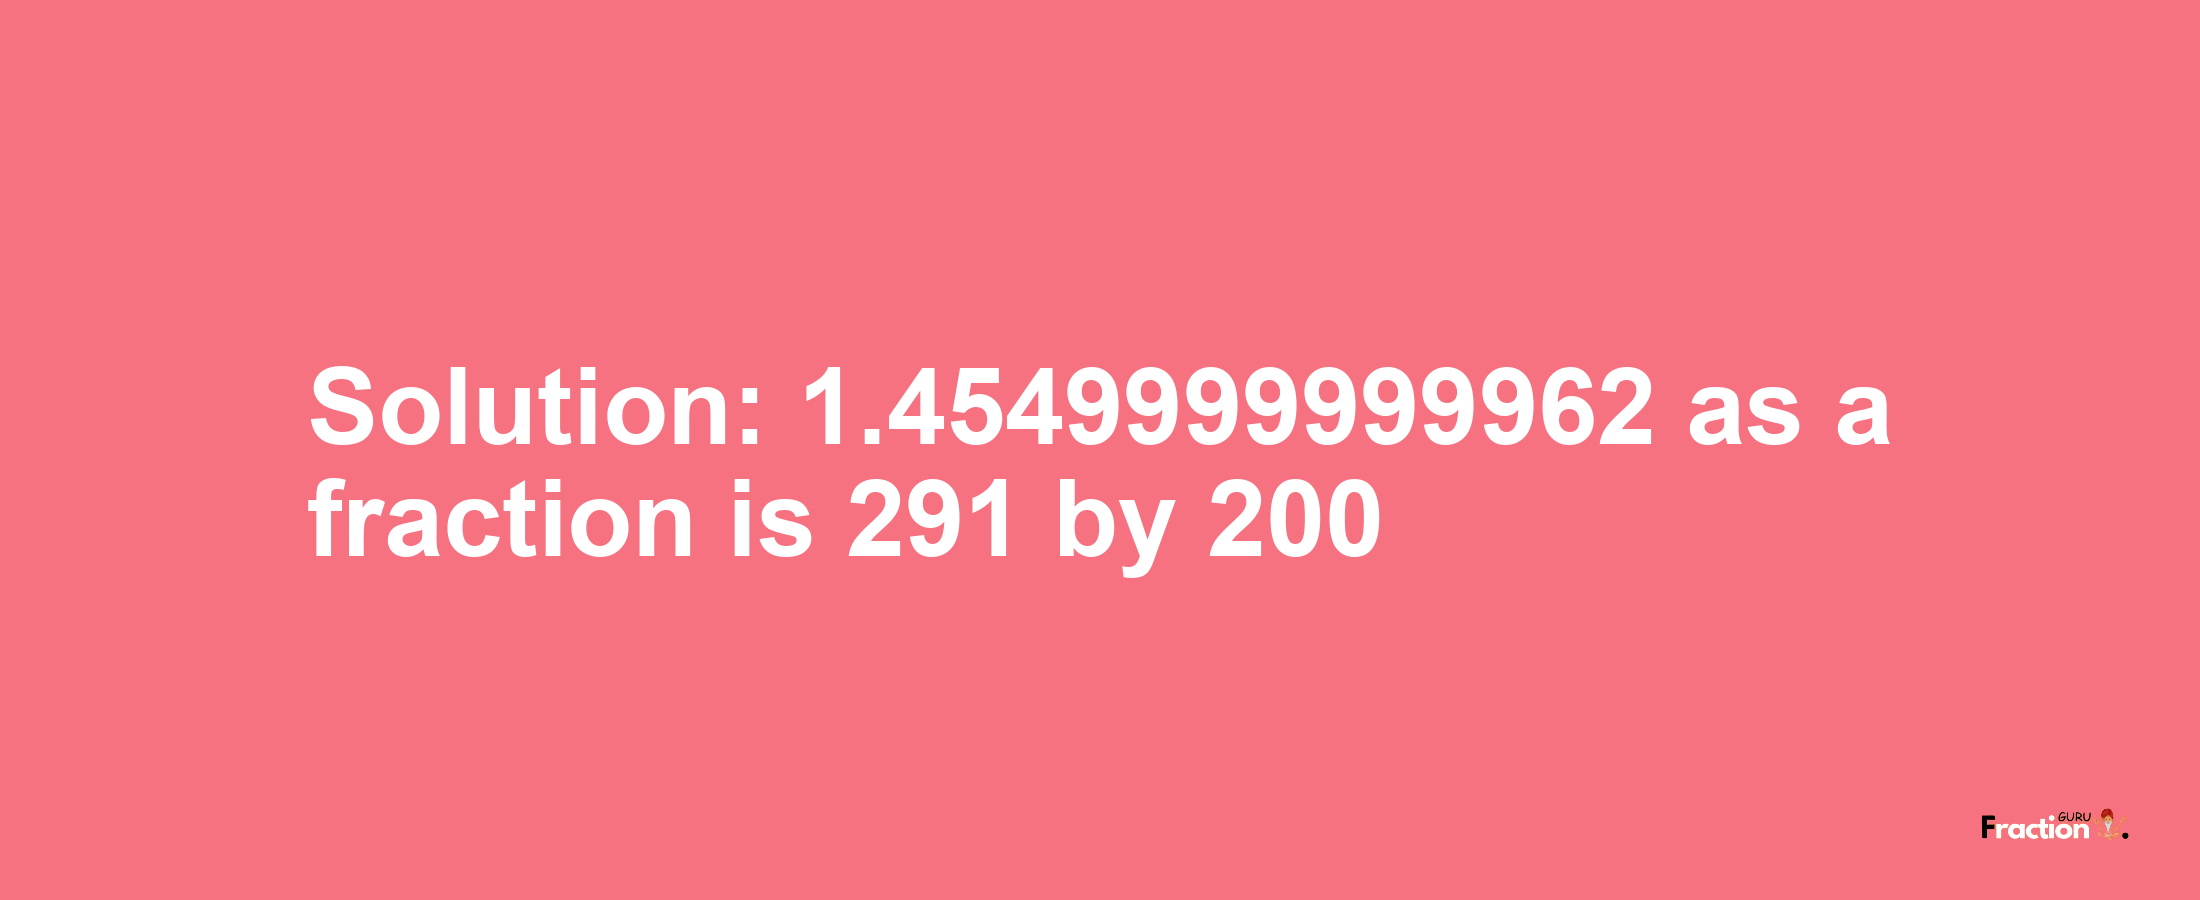 Solution:1.4549999999962 as a fraction is 291/200